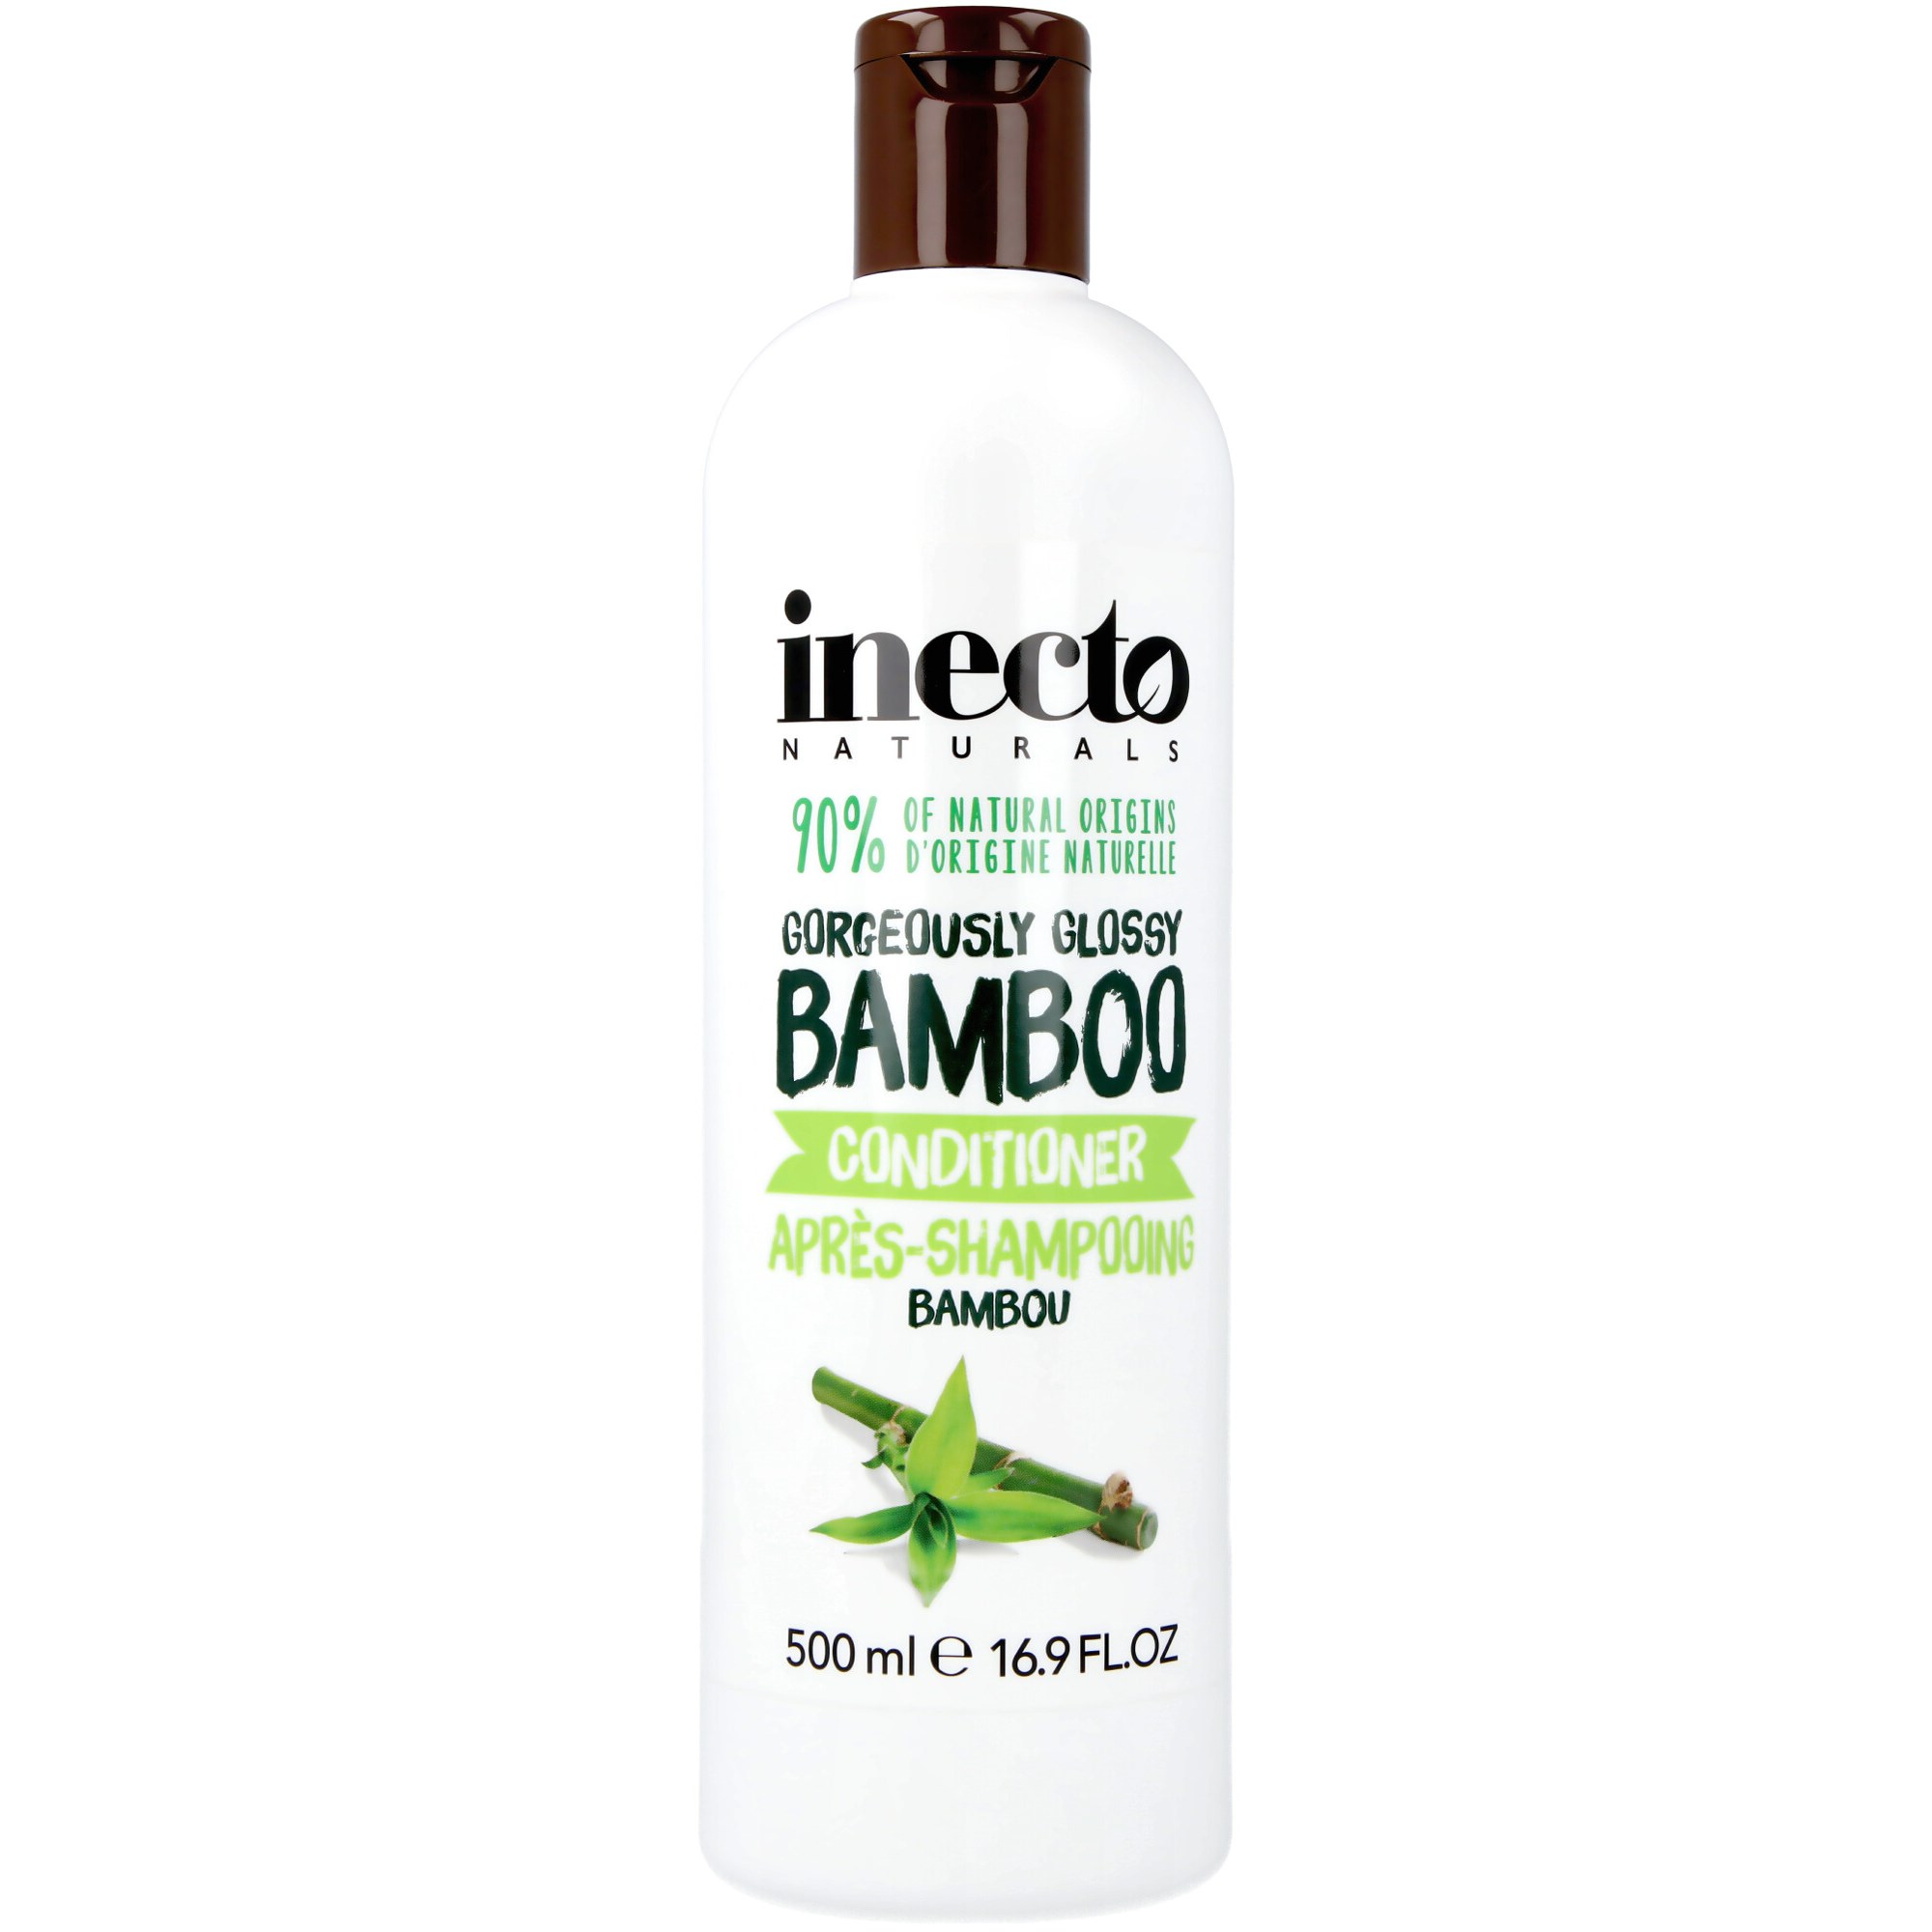 Inecto Naturals Gorgeously Glossy Bamboo conditioner 500 ml